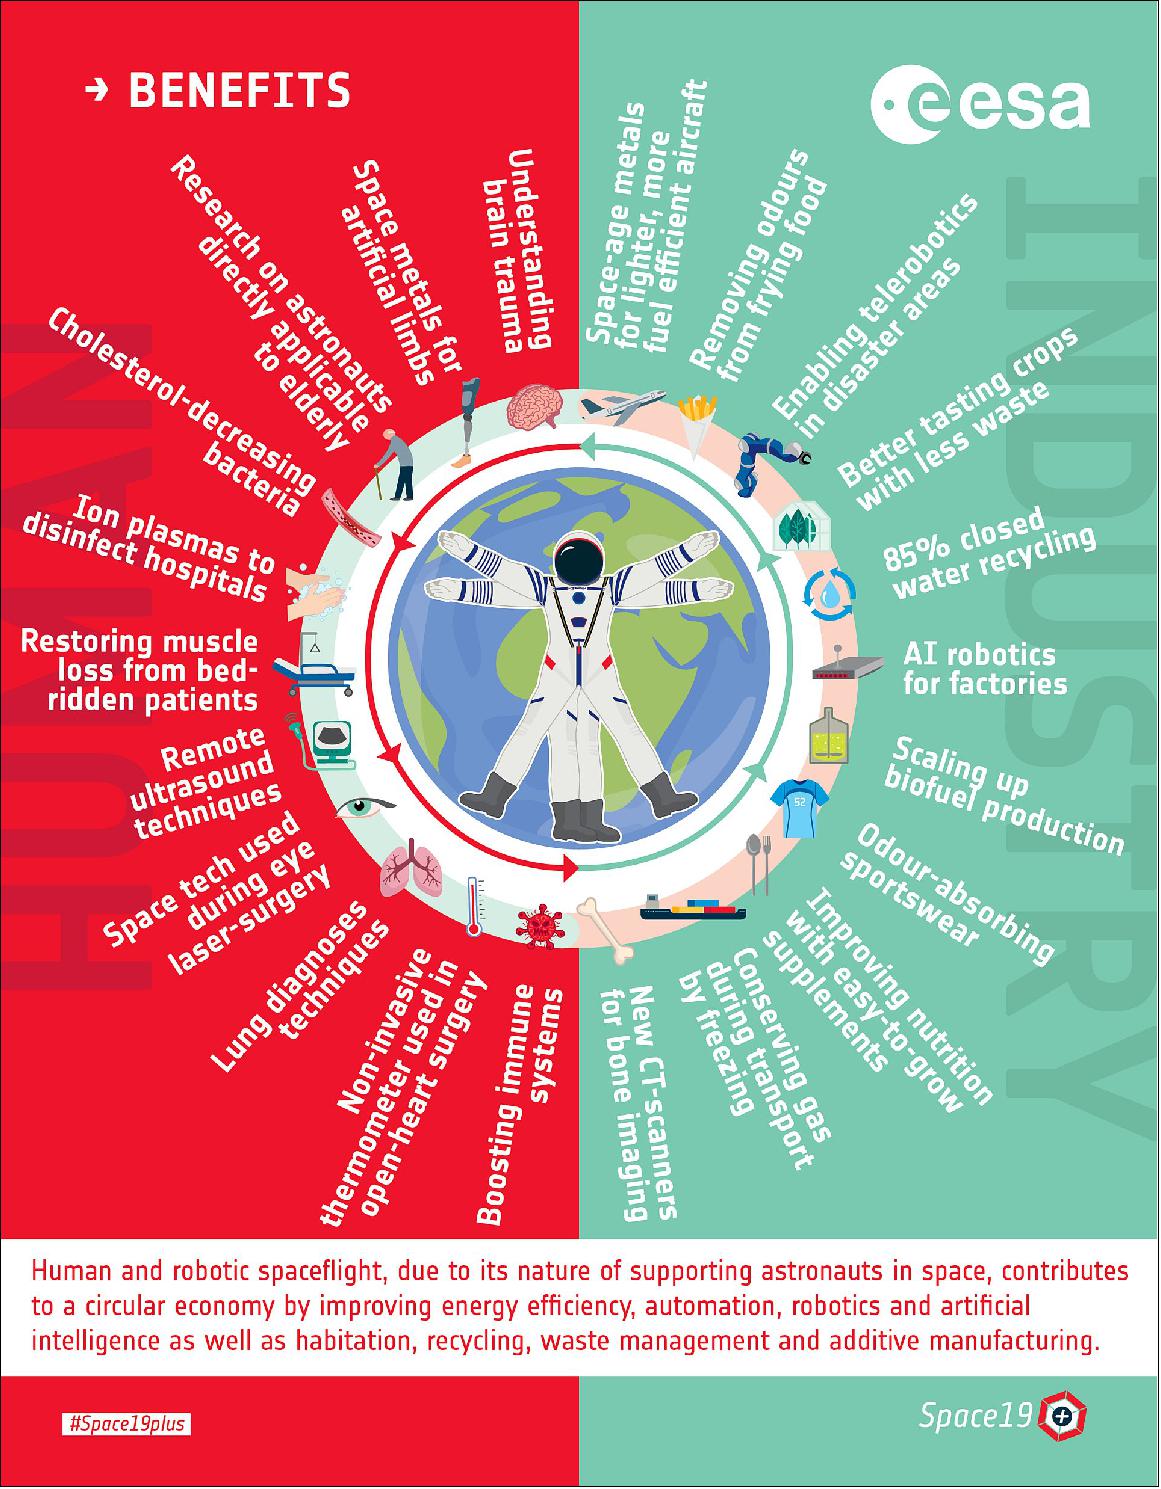 Figure 9: This infographic shows some of the benefits for humankind that have been made available through ESA’s human and robotic spaceflight program. The challenges of space exploration accelerate innovation for all on Earth. Human and robotic spaceflight is moving technology towards a circular economy by improving efficiency in energy, automation, robotics, artificial intelligence, habitation technology, recycling, waste management, and additive manufacturing. Scientific discoveries from human exploration are applied widely from health to metallurgy, while deeper knowledge about our solar system and life beyond Earth changes our perceptions of humankind (image credit: ESA, K. Oldenberg)